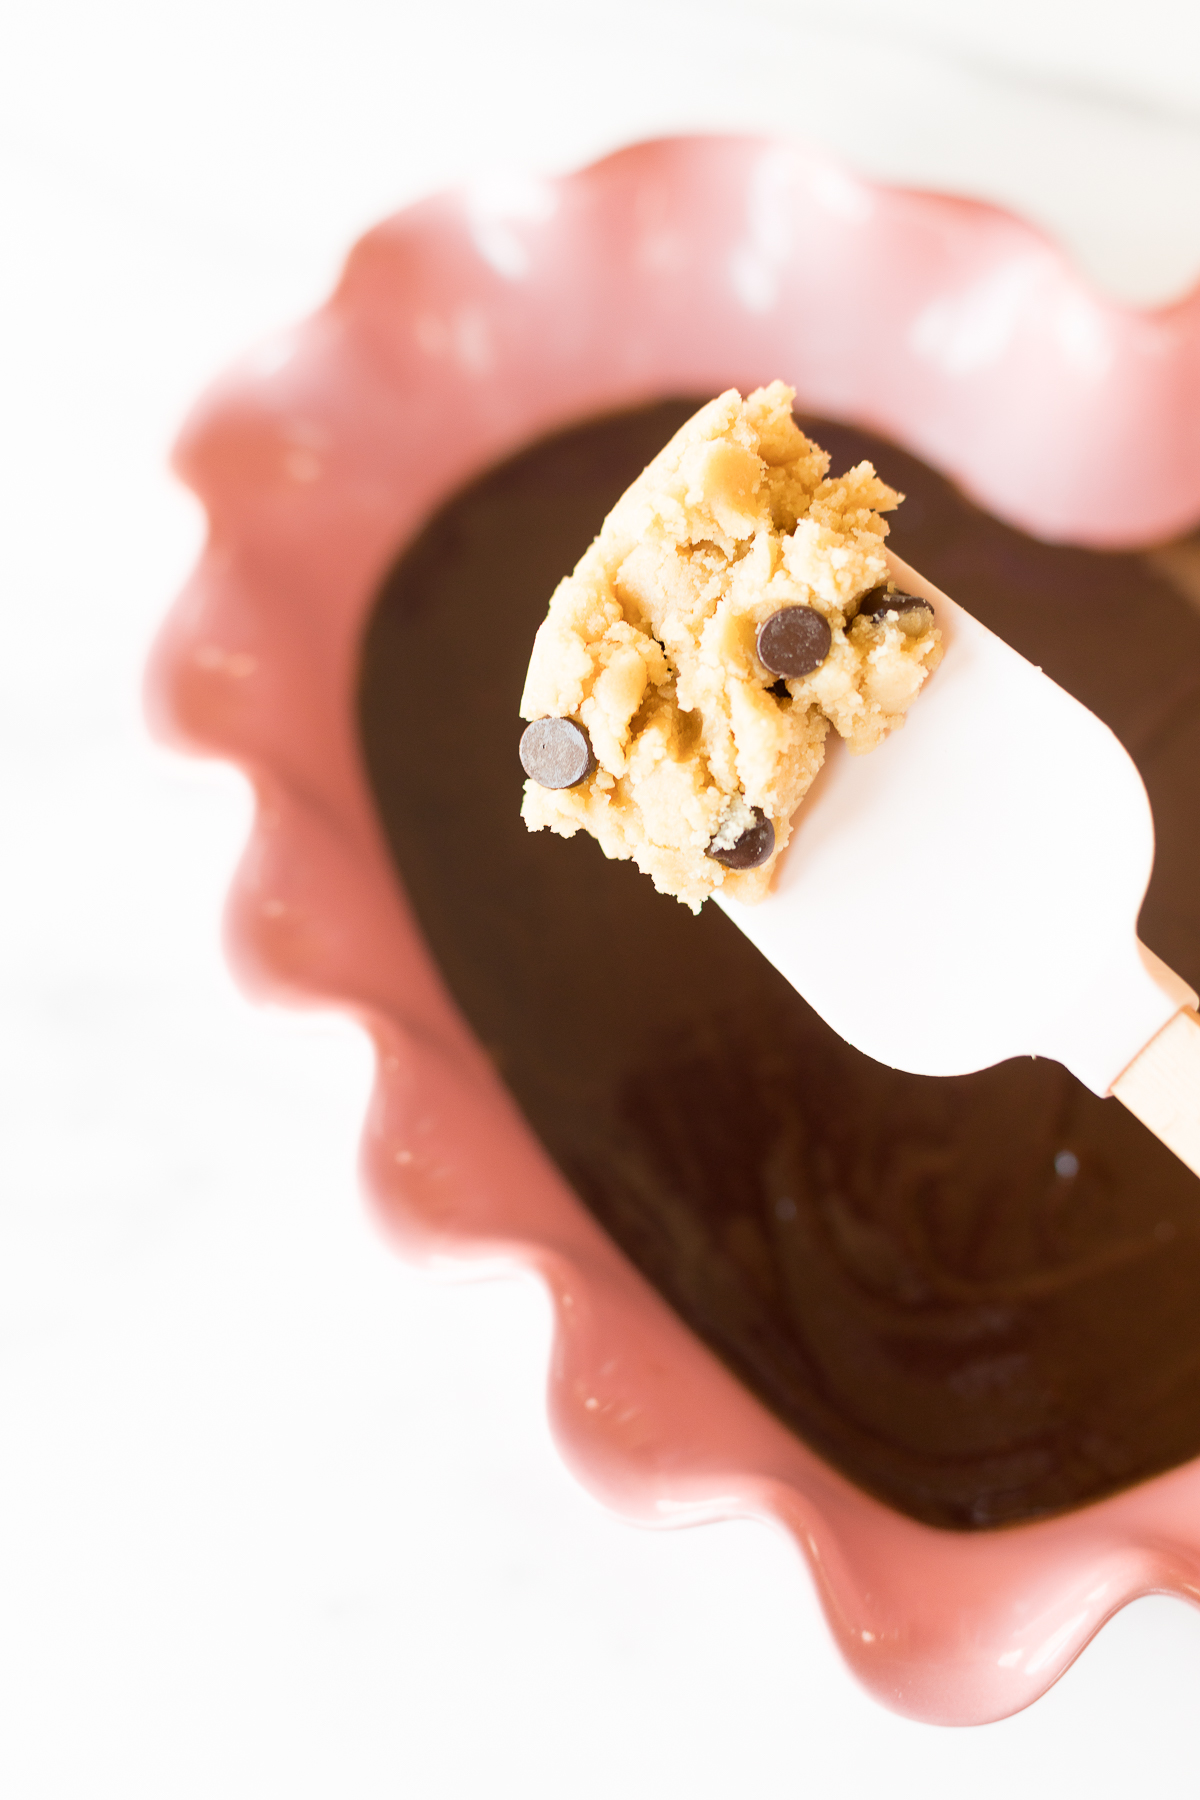 A scoop of brookie dough with chocolate chips on a white spatula, partially dipped in a bowl filled with melted chocolate.